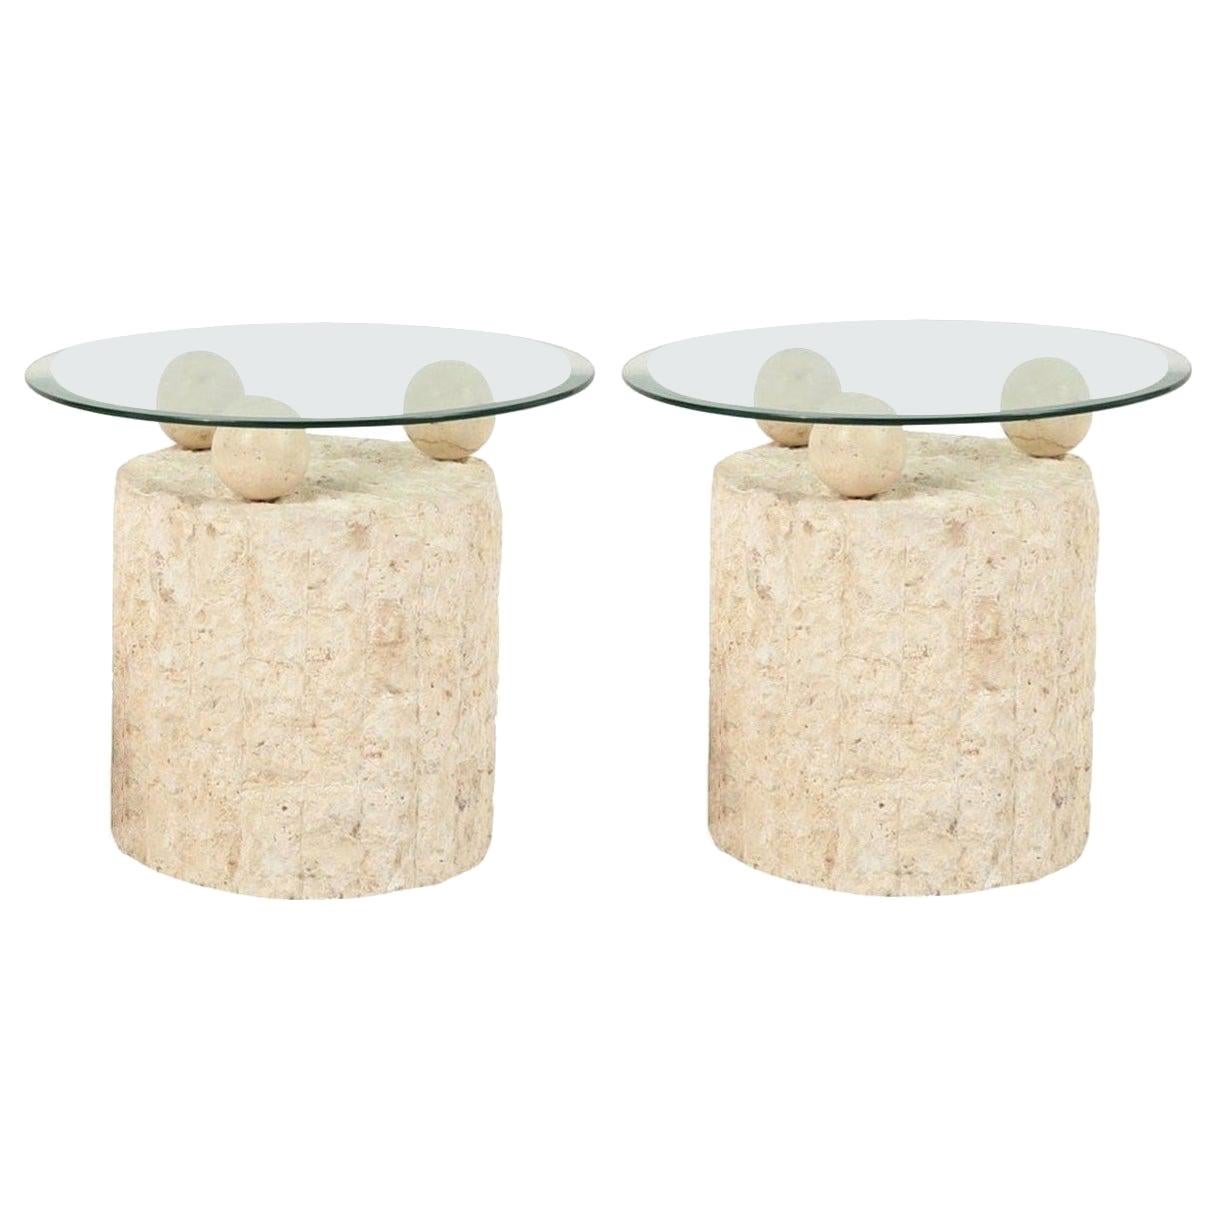 1980s Natural Mactan Stone End or Side Tables with Glass Tops